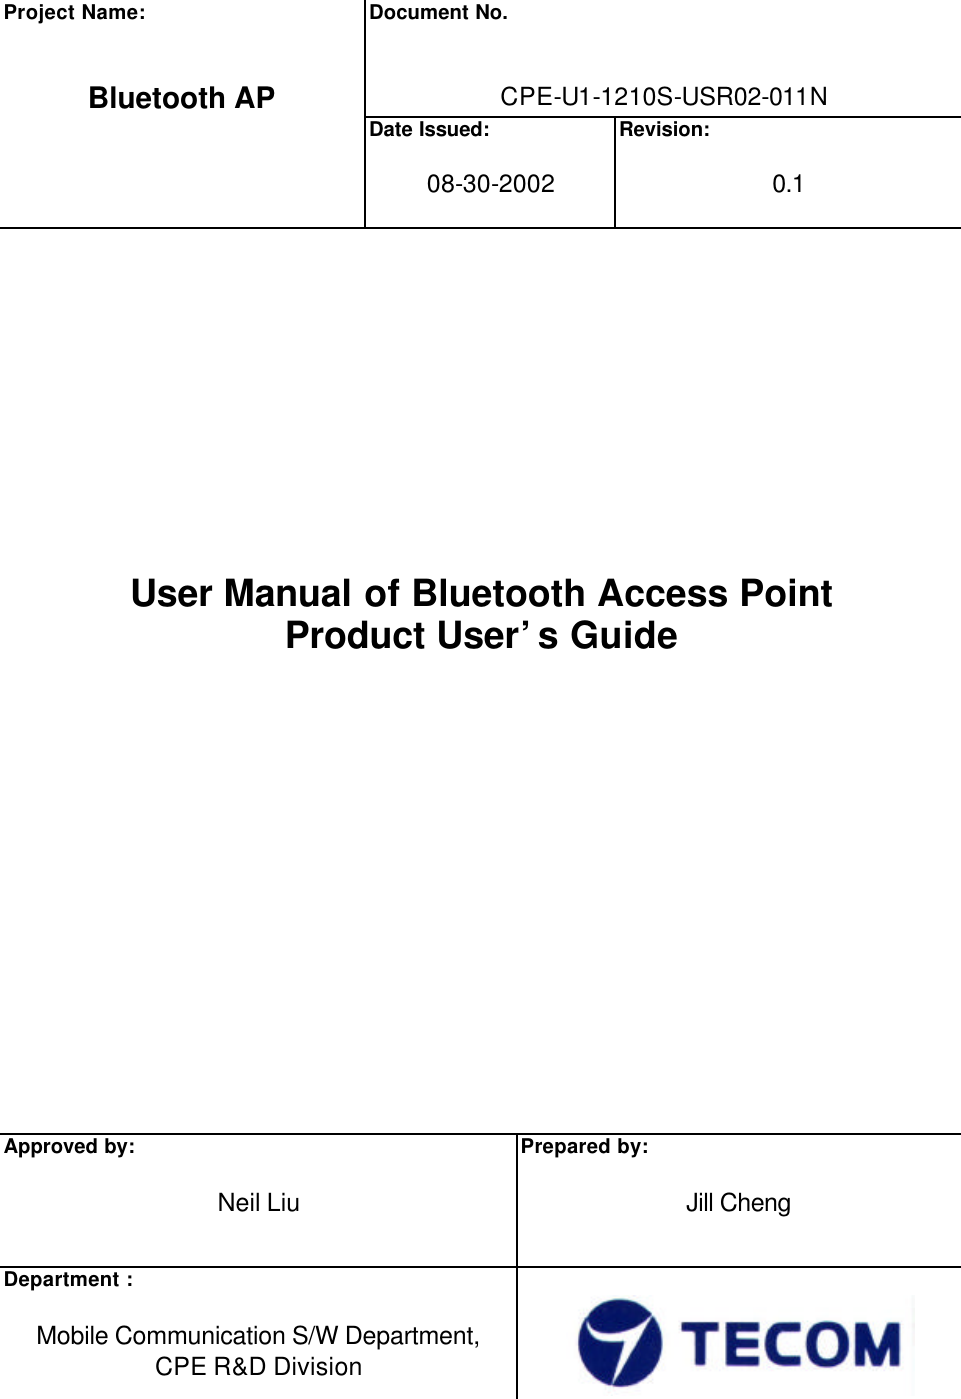 Document No.   CPE-U1-1210S-USR02-011N Project Name:   Bluetooth AP  Date Issued:  08-30-2002  Revision:  0.1          User Manual of Bluetooth Access Point Product User’s Guide            Approved by:  Neil Liu  Prepared by:  Jill Cheng Department :  Mobile Communication S/W Department,   CPE R&amp;D Division    